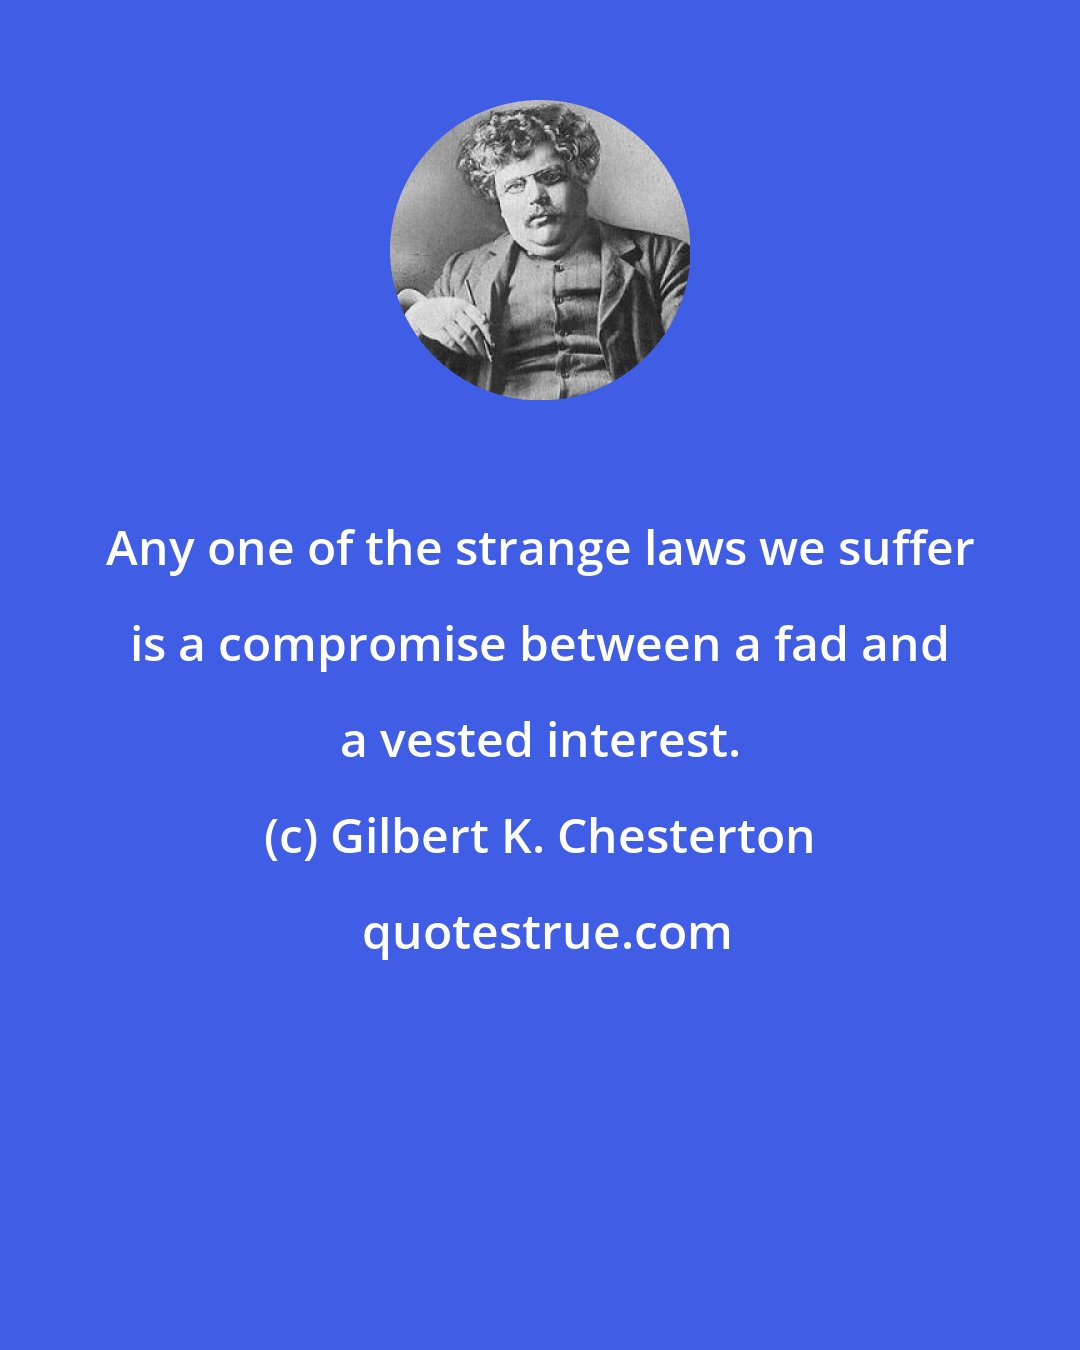 Gilbert K. Chesterton: Any one of the strange laws we suffer is a compromise between a fad and a vested interest.